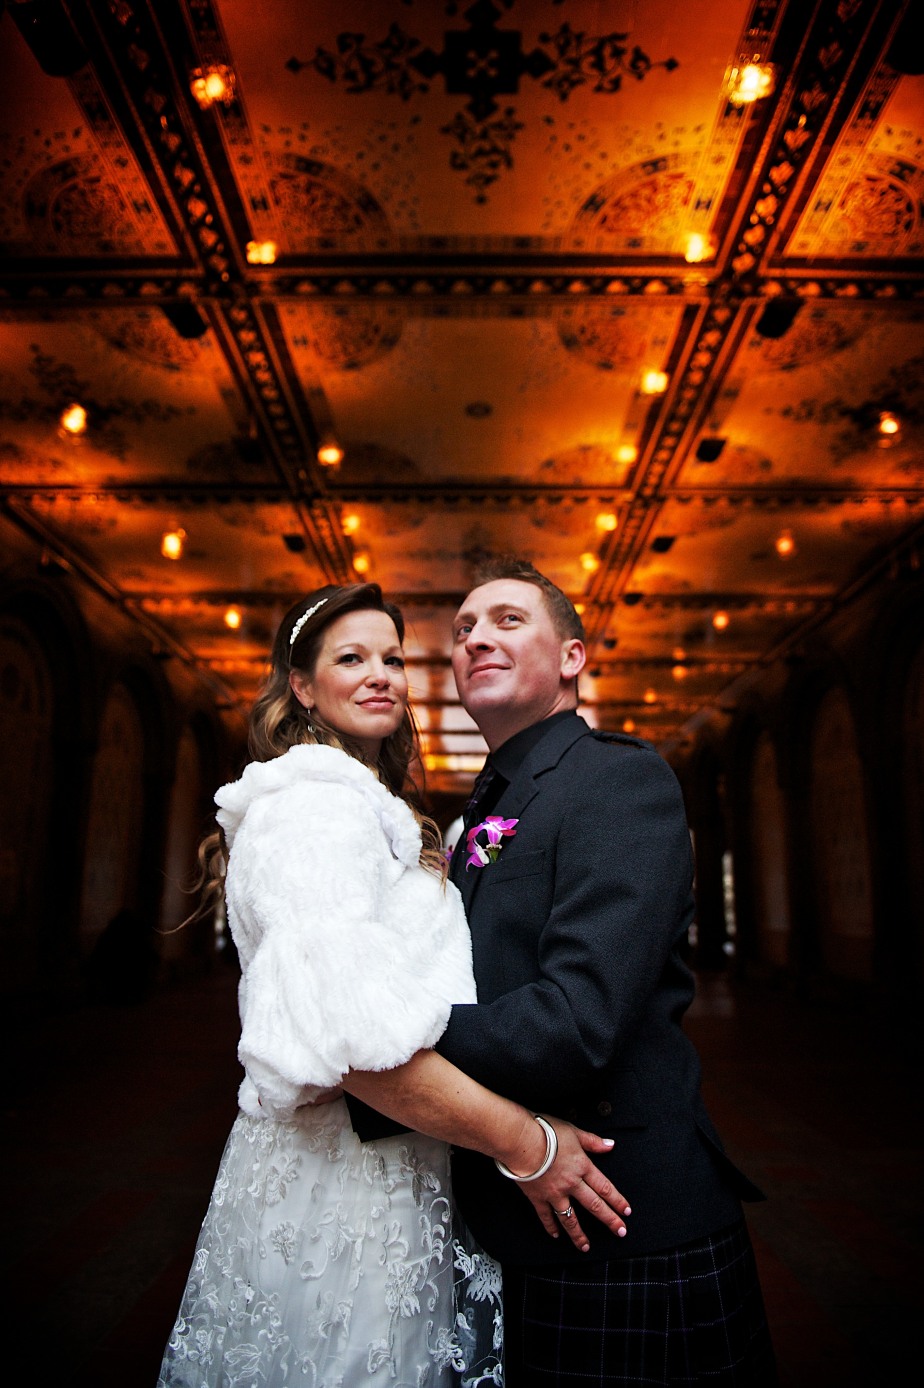 Suzanne and Stuart get married in NYC